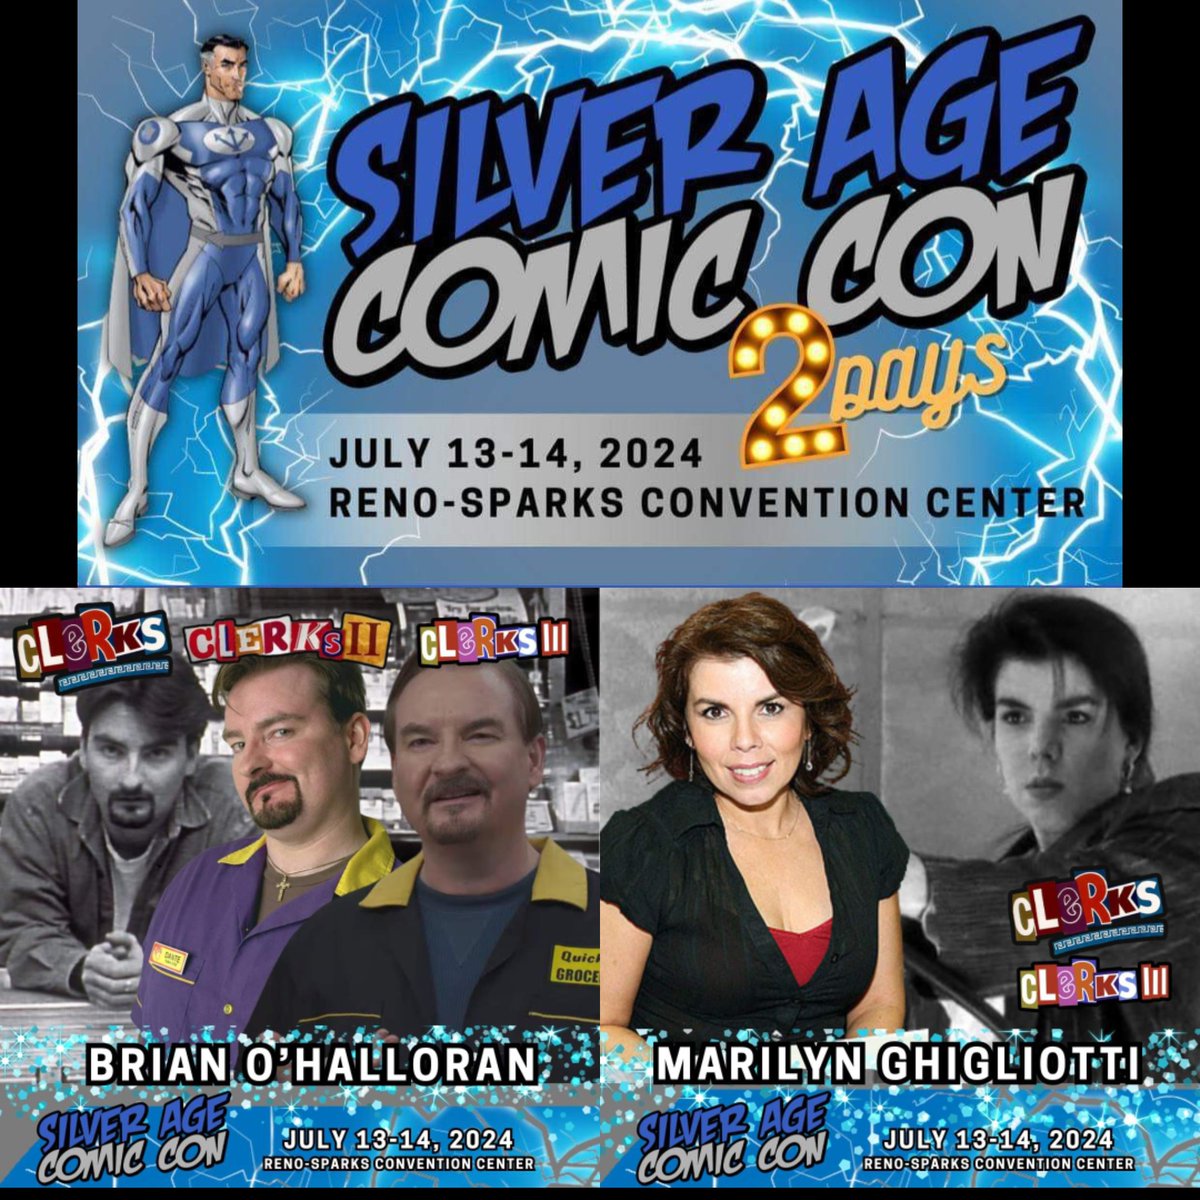 RENO, NEVADA
We will be at
SILVER AGE COMIC CON
JULY 13th & 14th
With Veronica herself
Marilyn Ghigliotti
@ThatClerksGirl
Info and Tix at
SilverAgeComicCon.com
👸
Some guests provided by
@ZSCEntertain